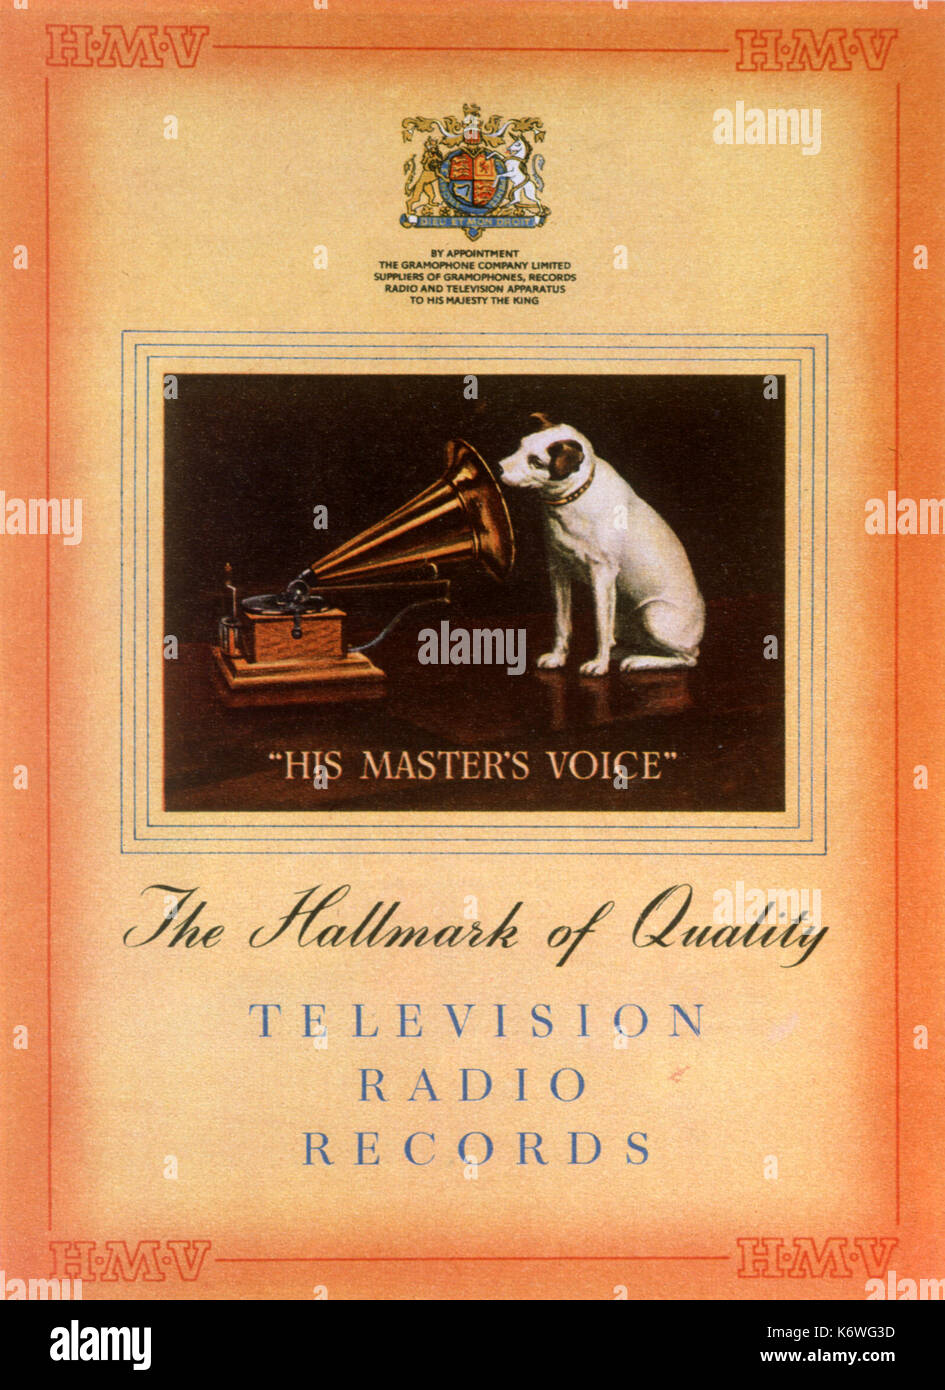 EARLY RECORDINGS - 'His Master's Voice' advert for early gramophone using early 78 record  (Phonograph Stock Photo